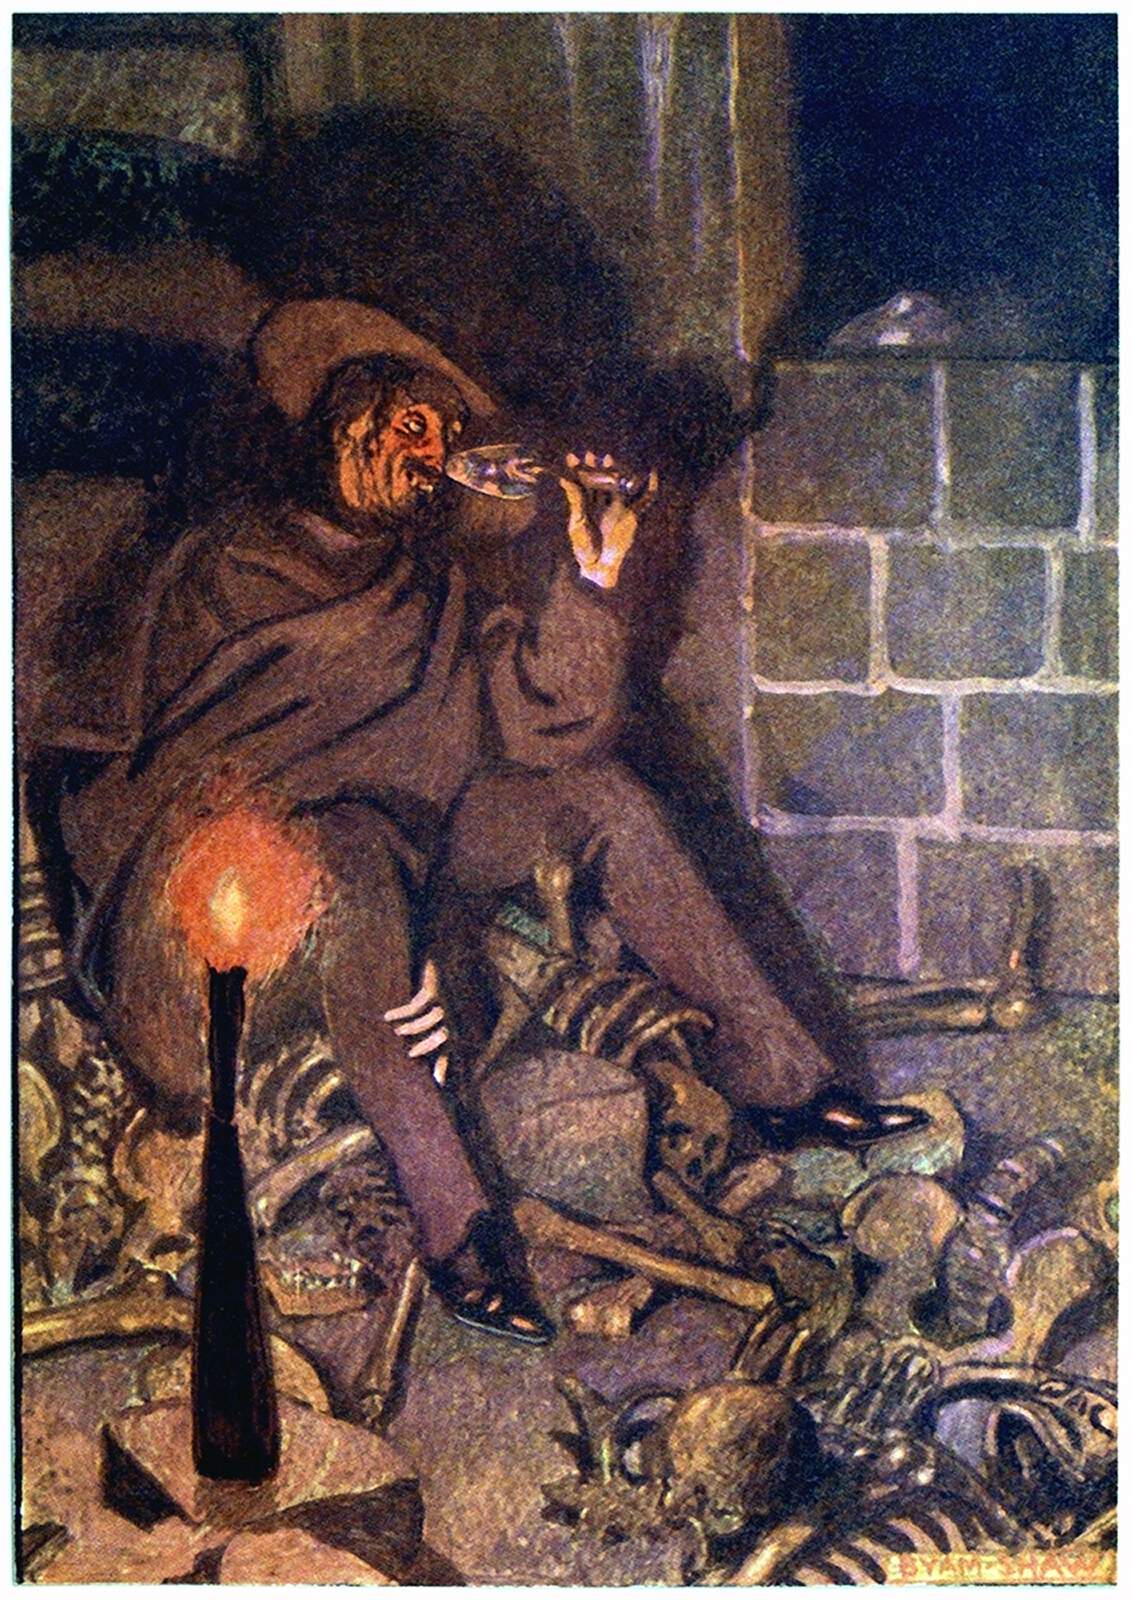 The Cask of Amontillado – Old Book Illustrations